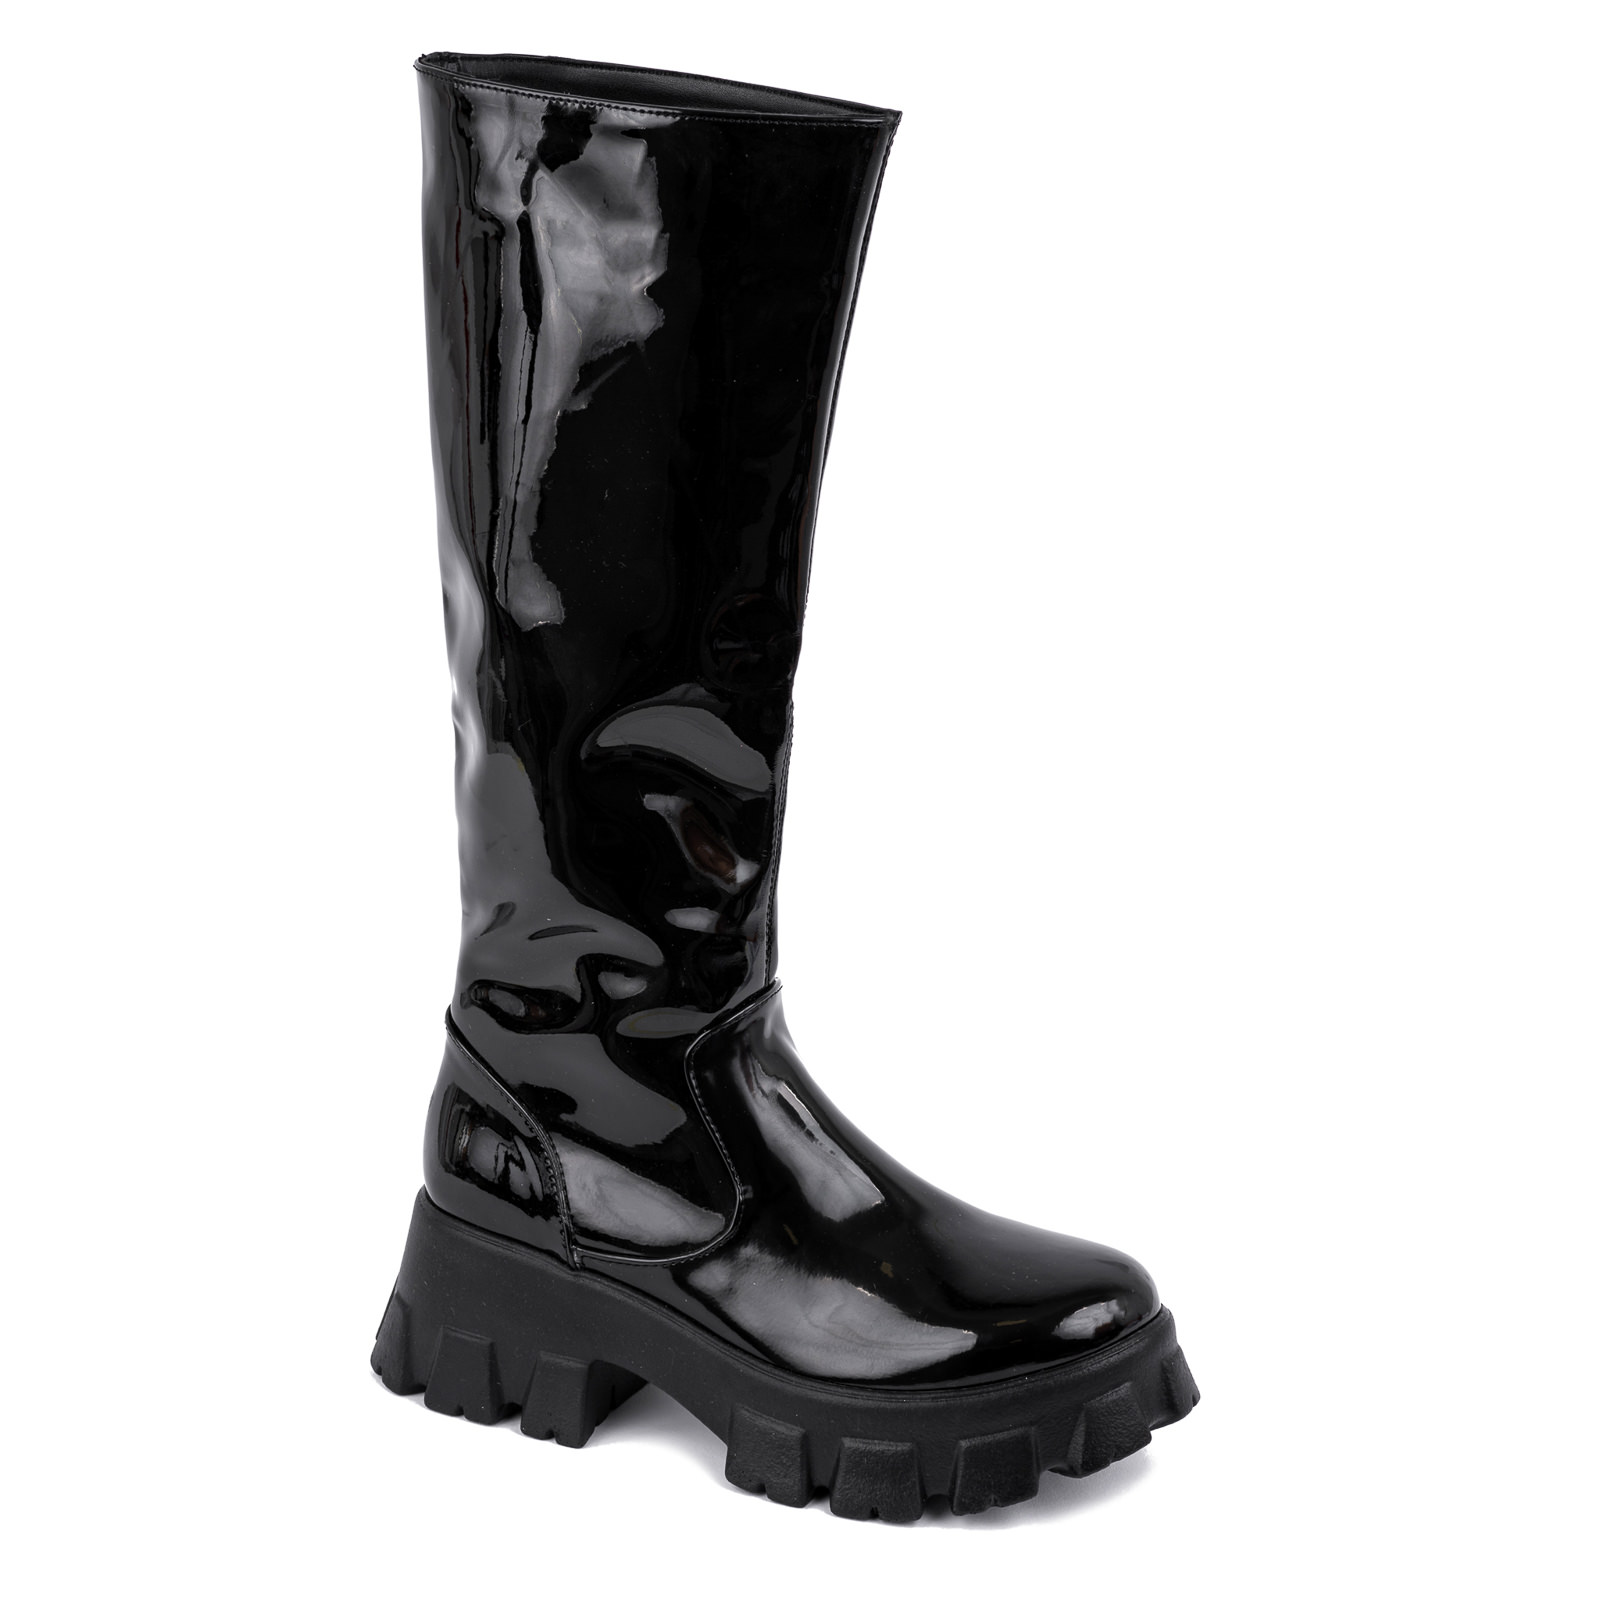 PATENT HIGH BOOTS WITH SPORT SOLE - BLACK